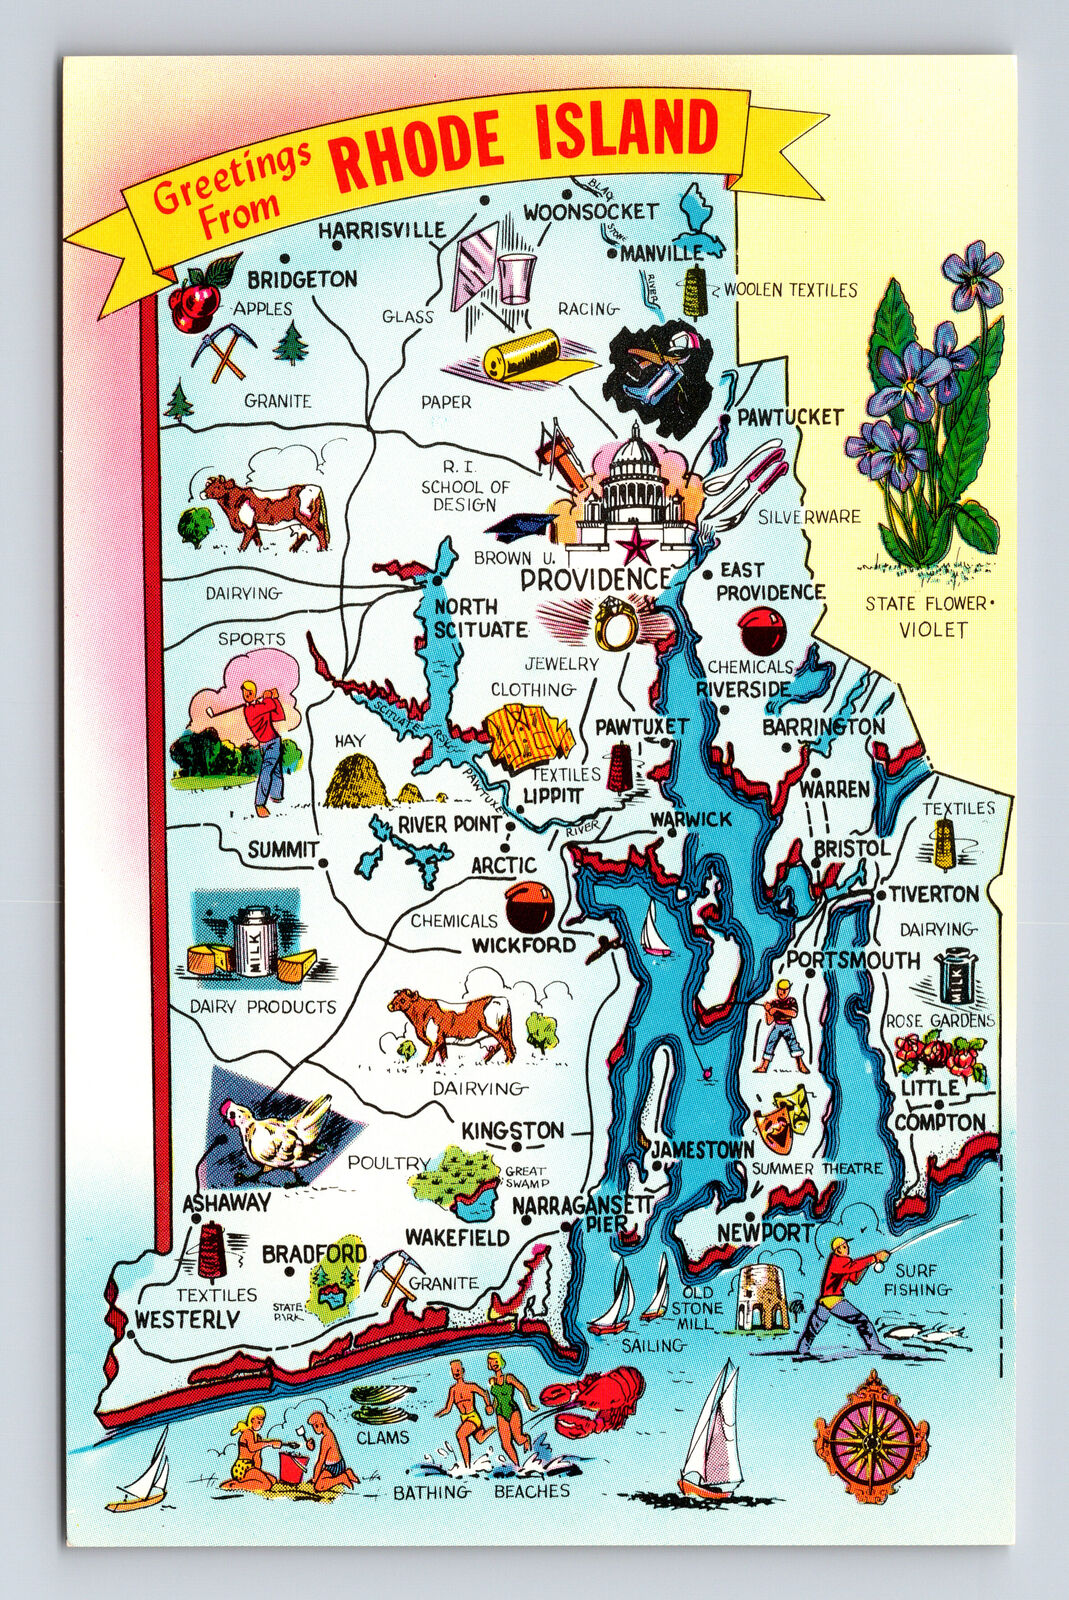 Pictorial Tourist Attraction Map State Flower Greetings Rhode Island RI Postcard